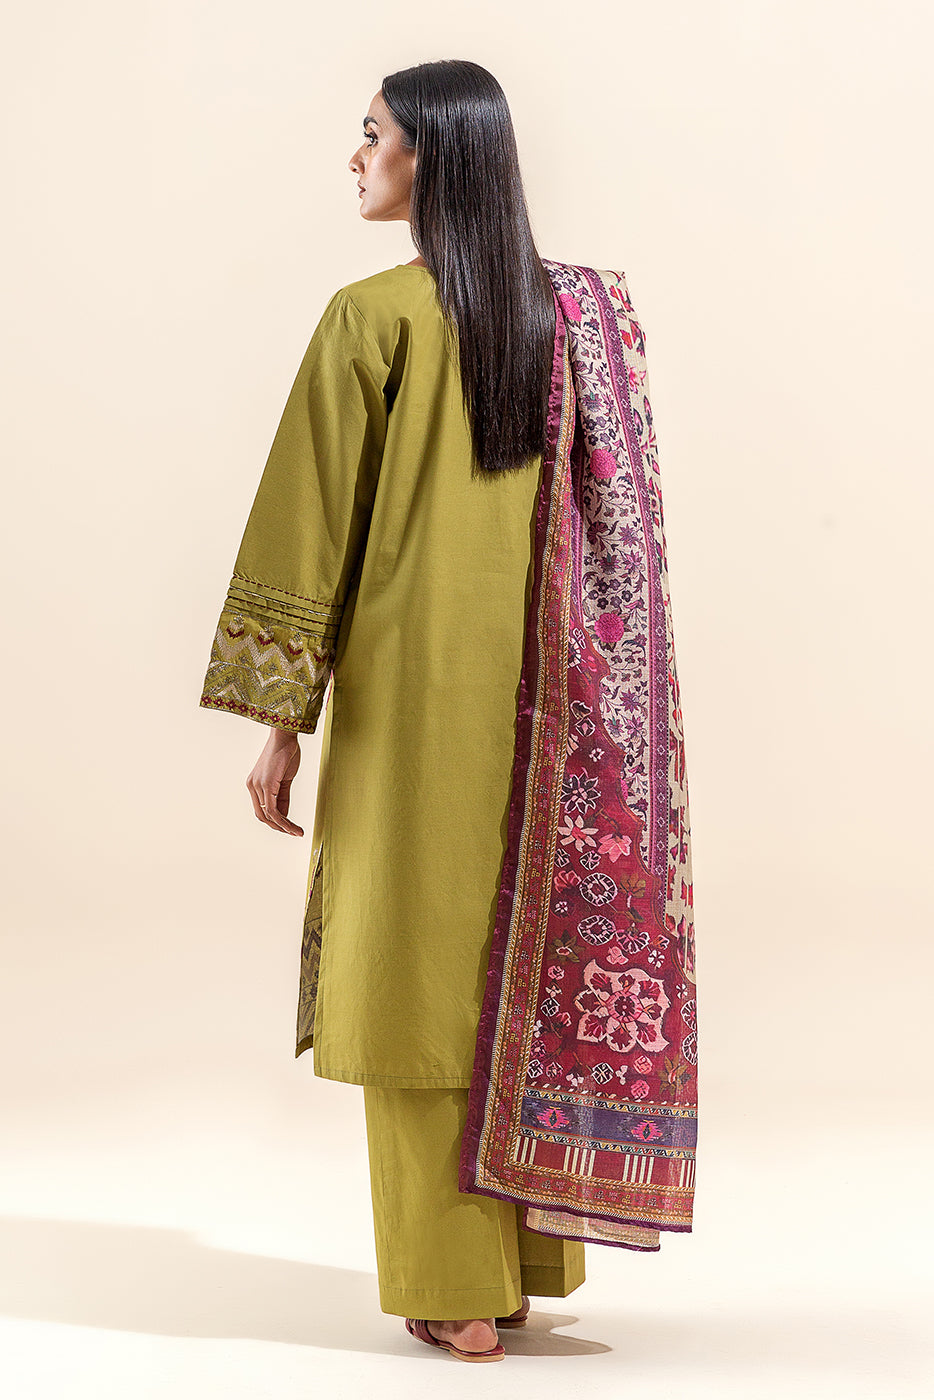 2 PIECE EMBROIDERED LAWN SUIT-TRIBAL CHARM (UNSTITCHED)